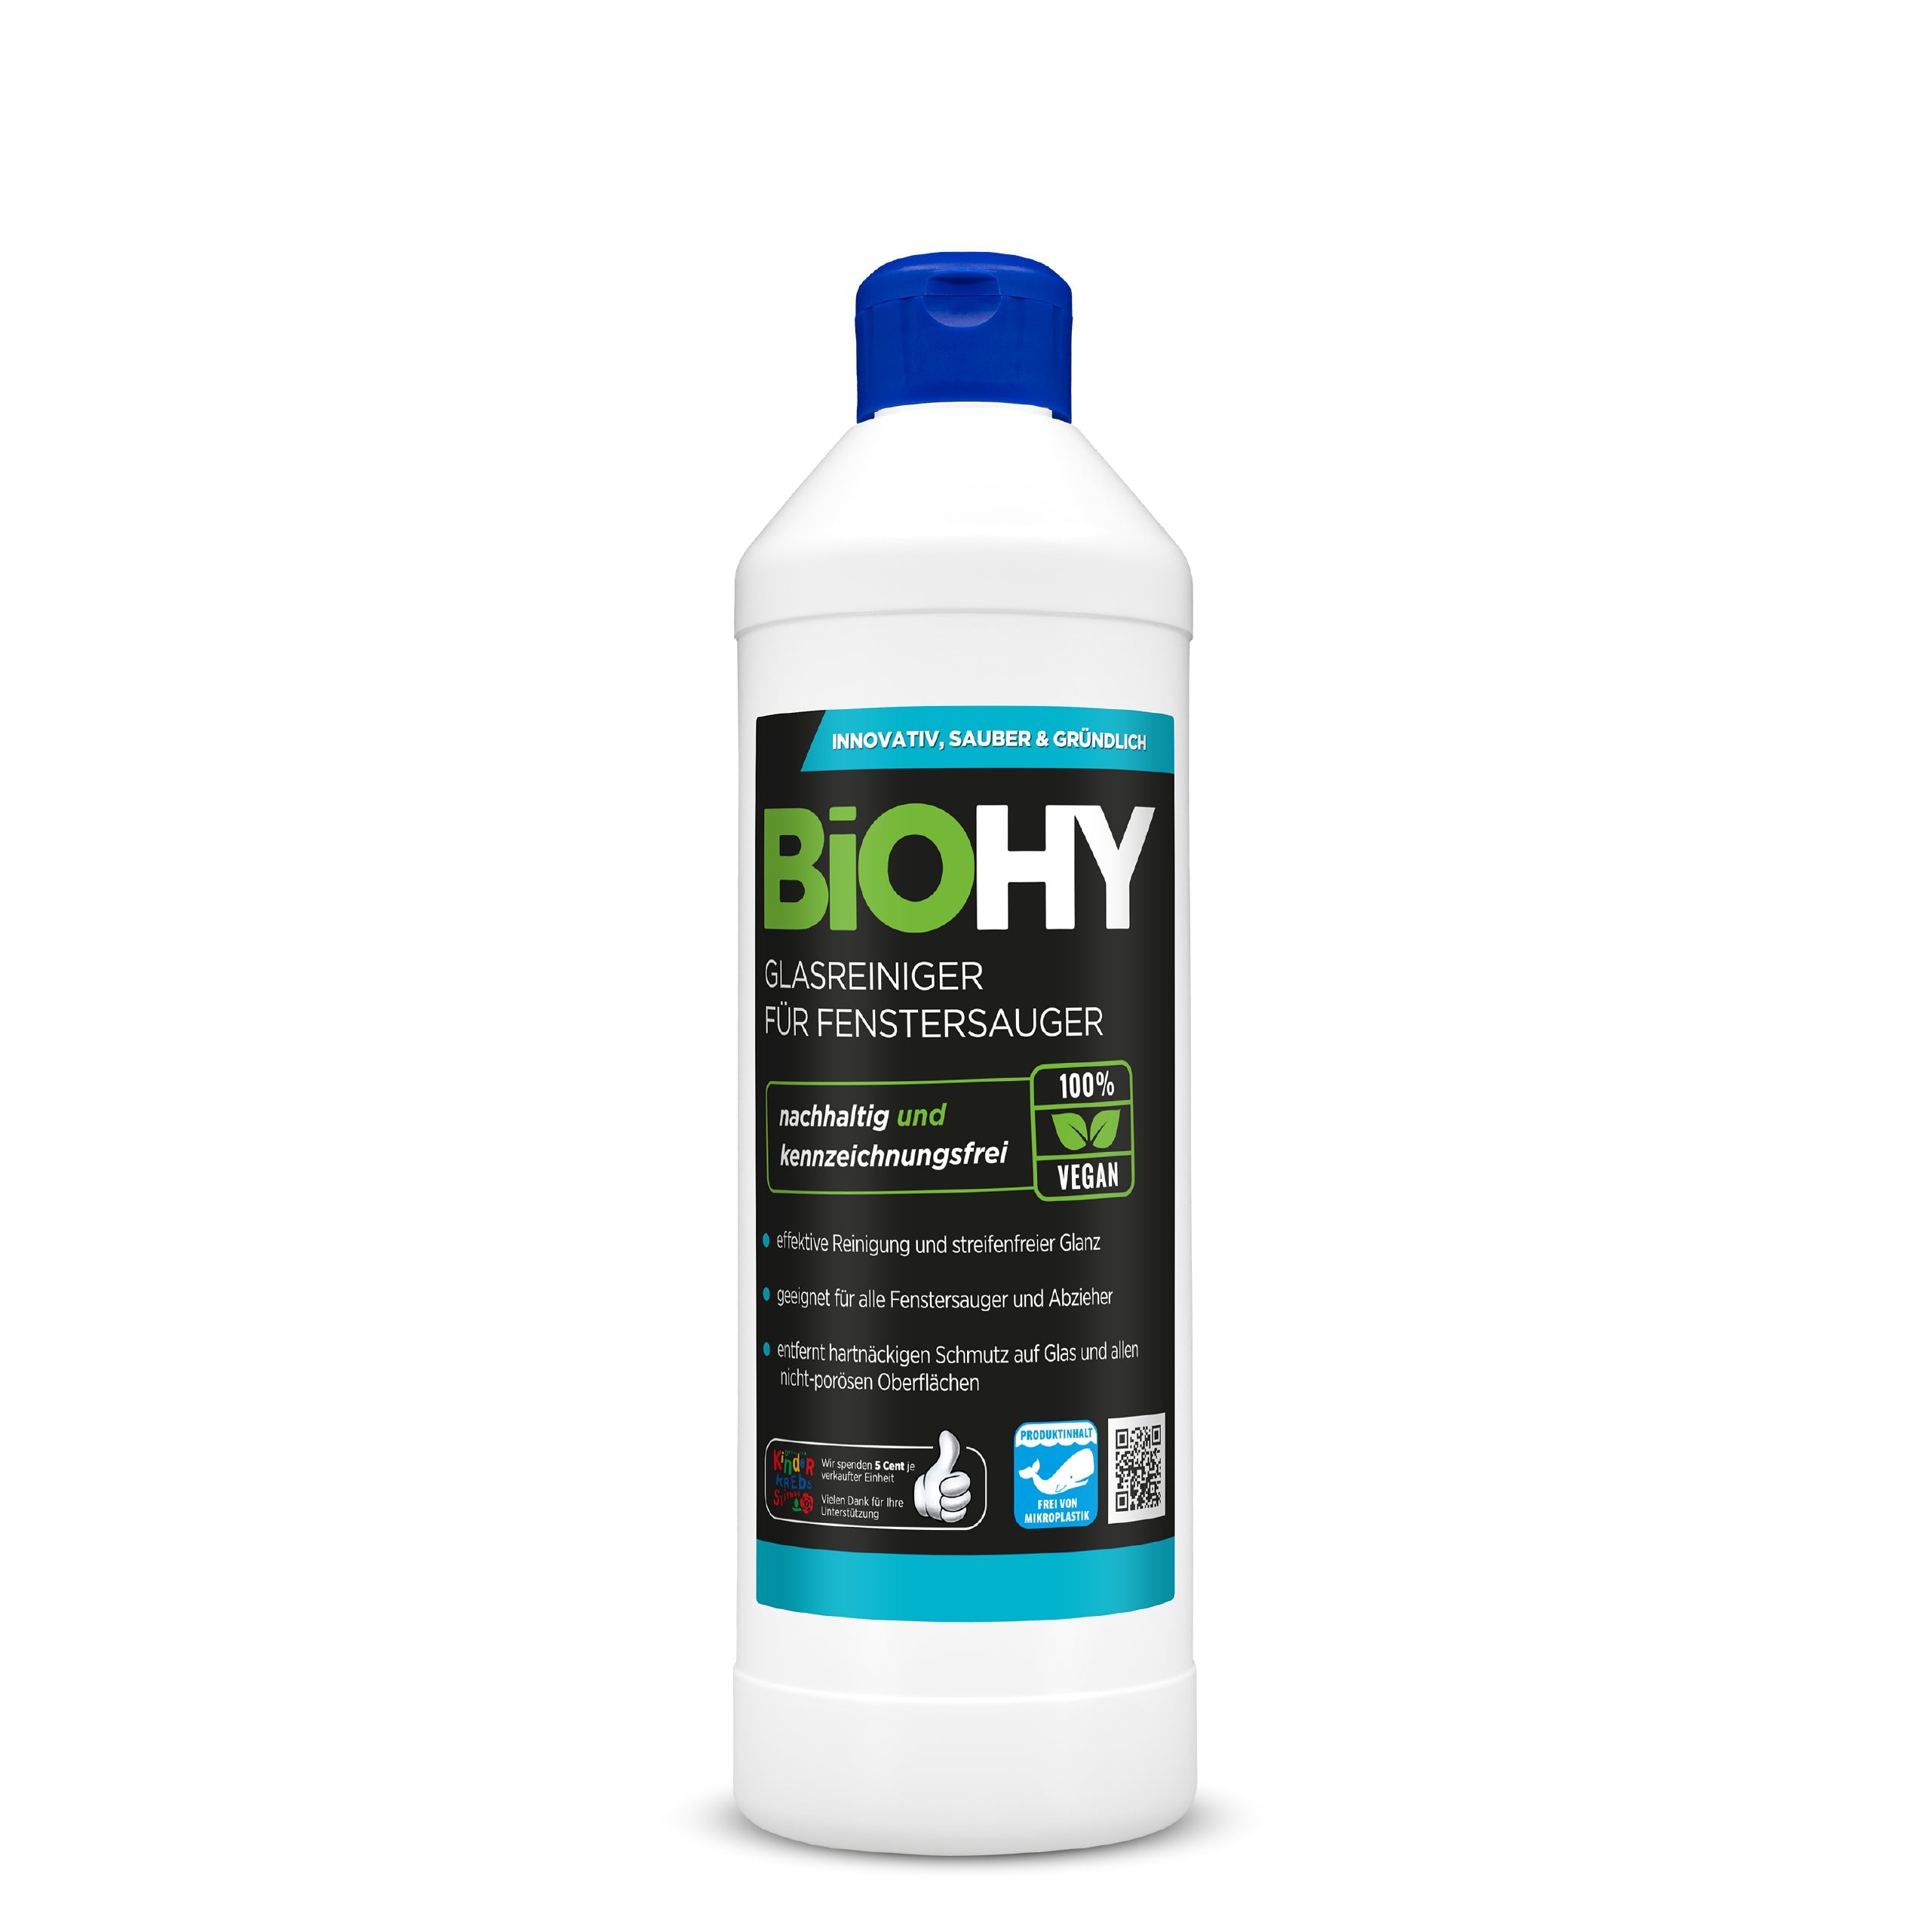 BiOHY glass cleaner for window vacuums, window cleaning agents, glass cleaners, window cleaners